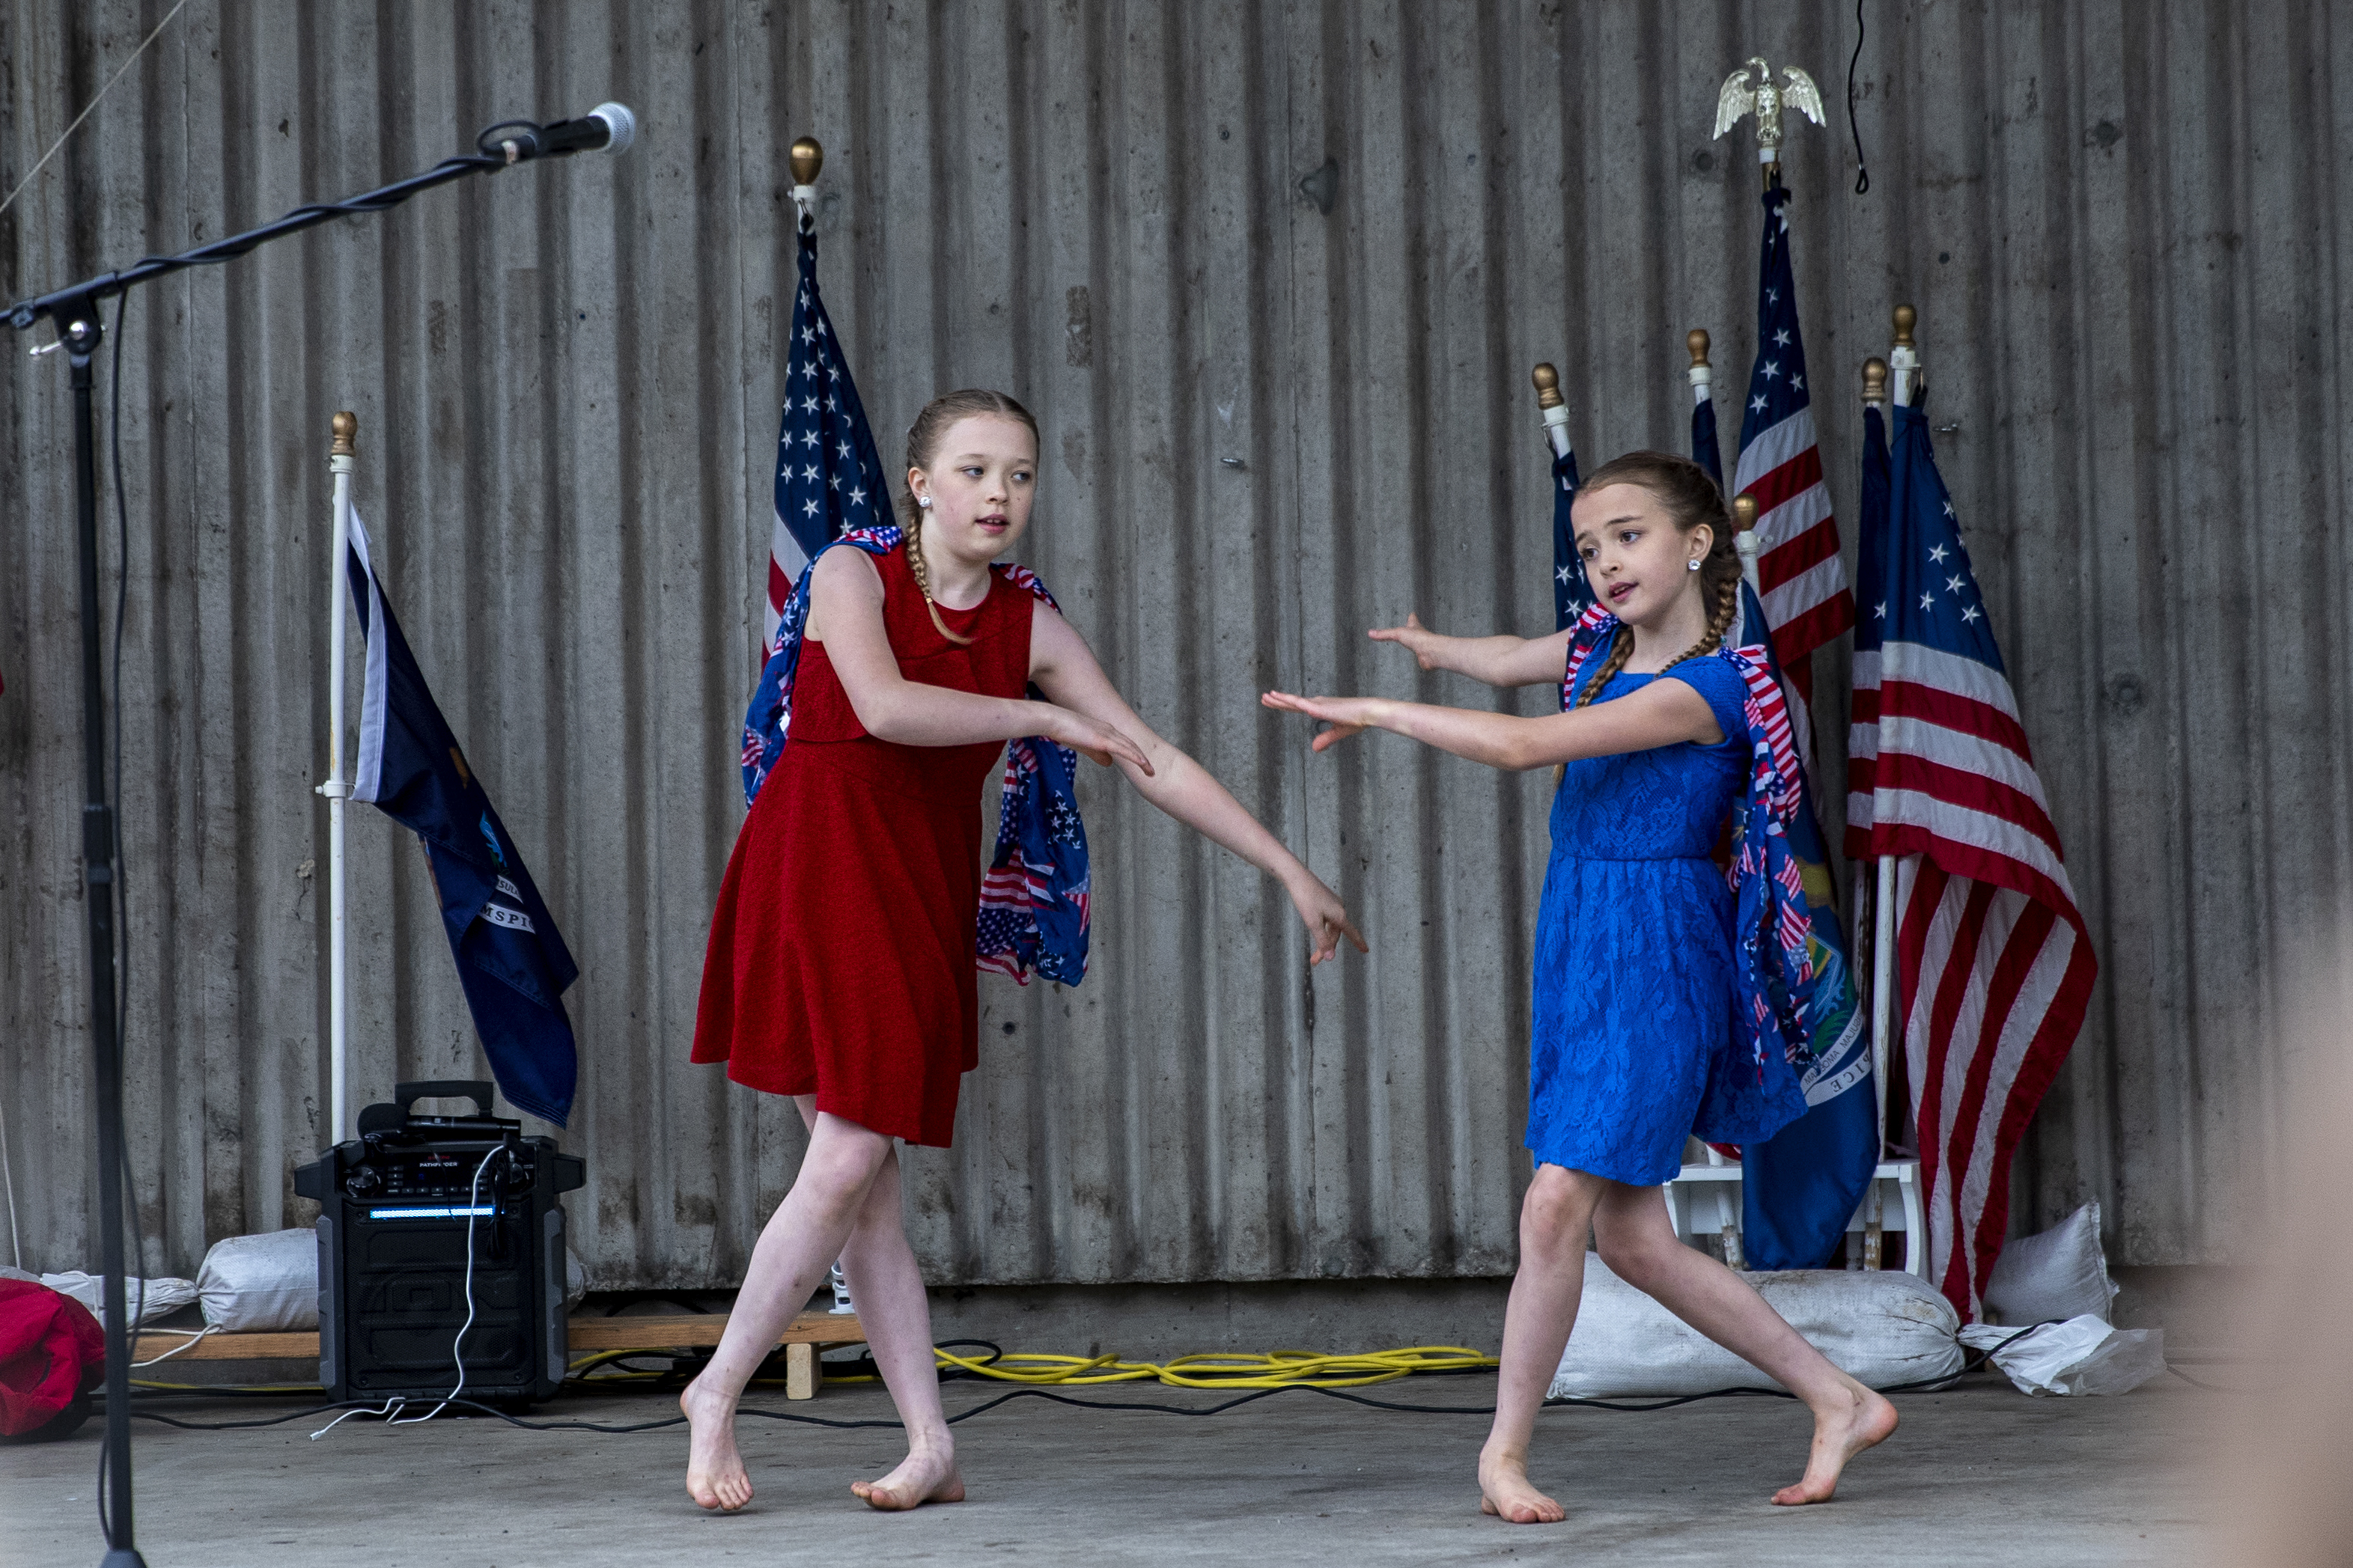 Hayden, 13, and Gracee Heikkila, 10, perform a dance routine they developed to the song "We Bleed The Same Color" by Mandisa, featuring TobyMac and Kirk Franklin, during the "American Patriot Rally-Sheriffs speak out" event at Rosa Parks Circle in downtown Grand Rapids on Monday, May 18, 2020. The crowd is protesting against Gov. Gretchen Whitmer's stay-at-home order. The sisters are from Battle Creek. (Cory Morse | MLive.com)